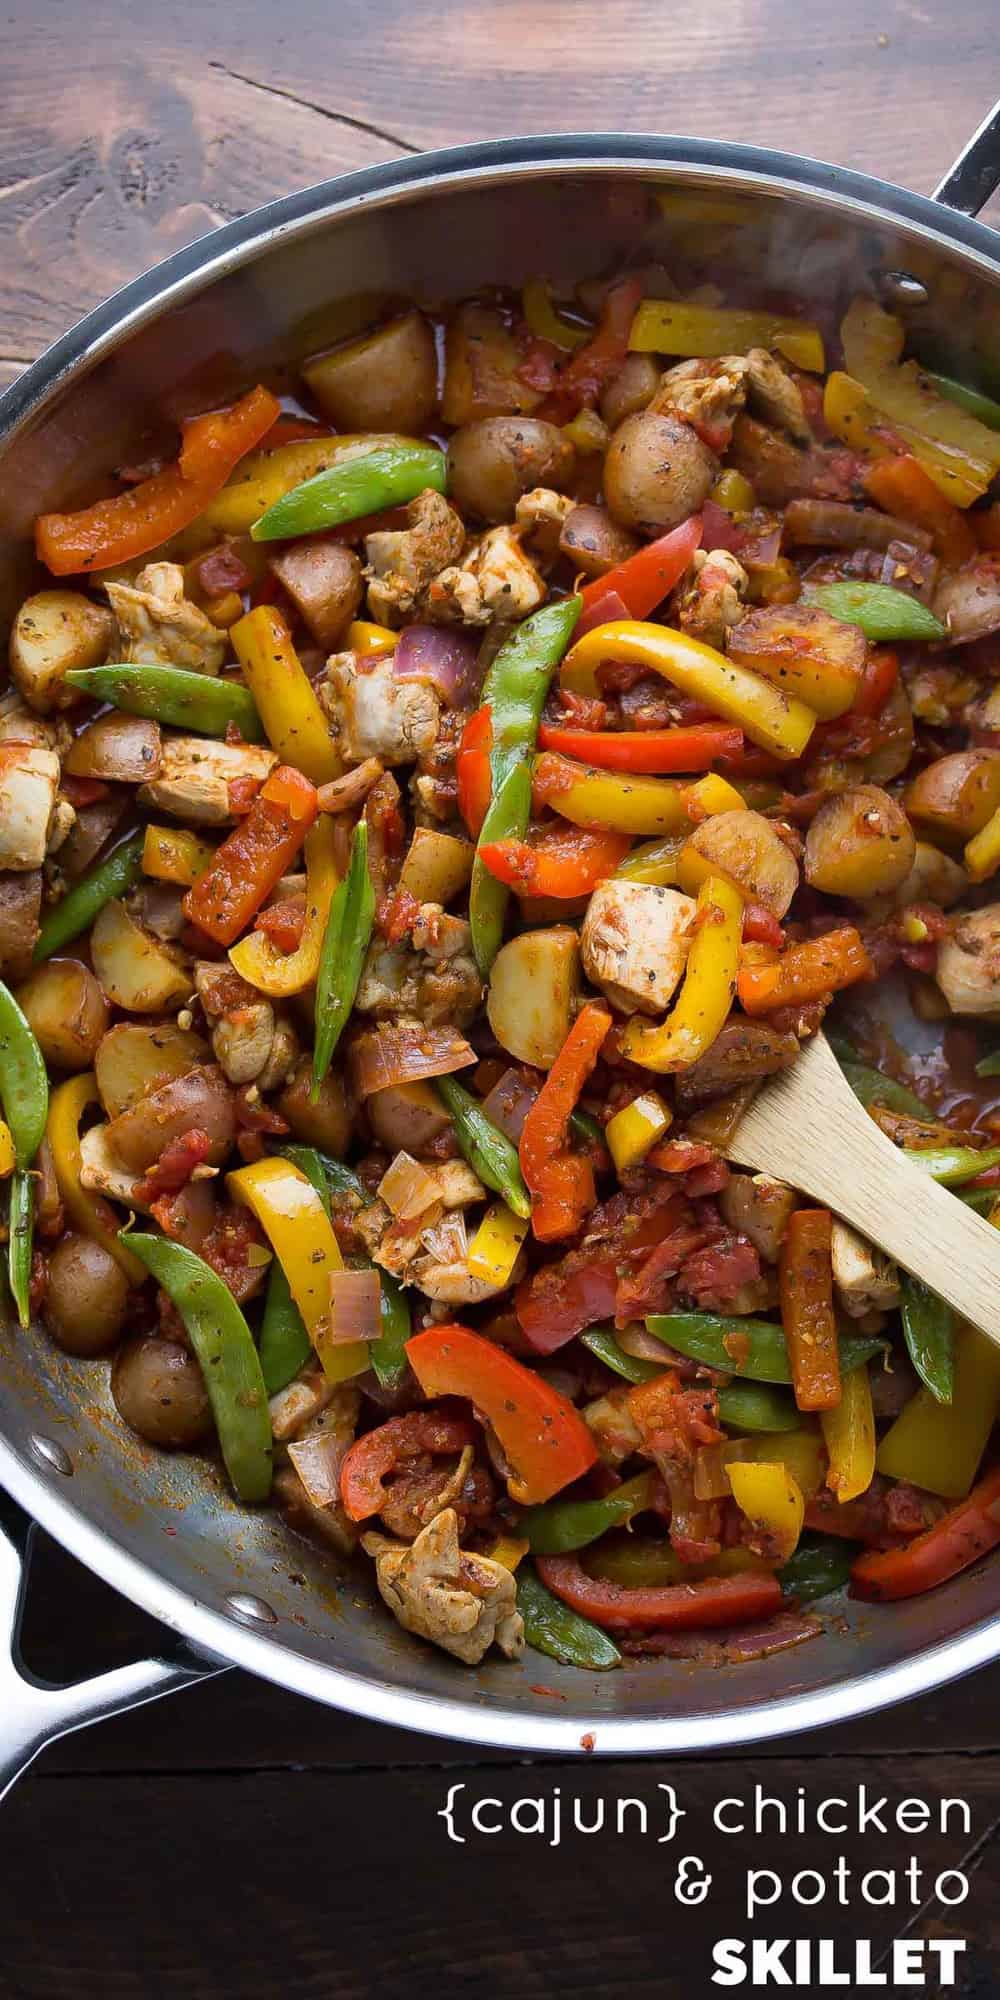 Healthy Chicken Skillet with Cajun Potatoes and Veggies. A one pot, 30-minute dinner recipe!